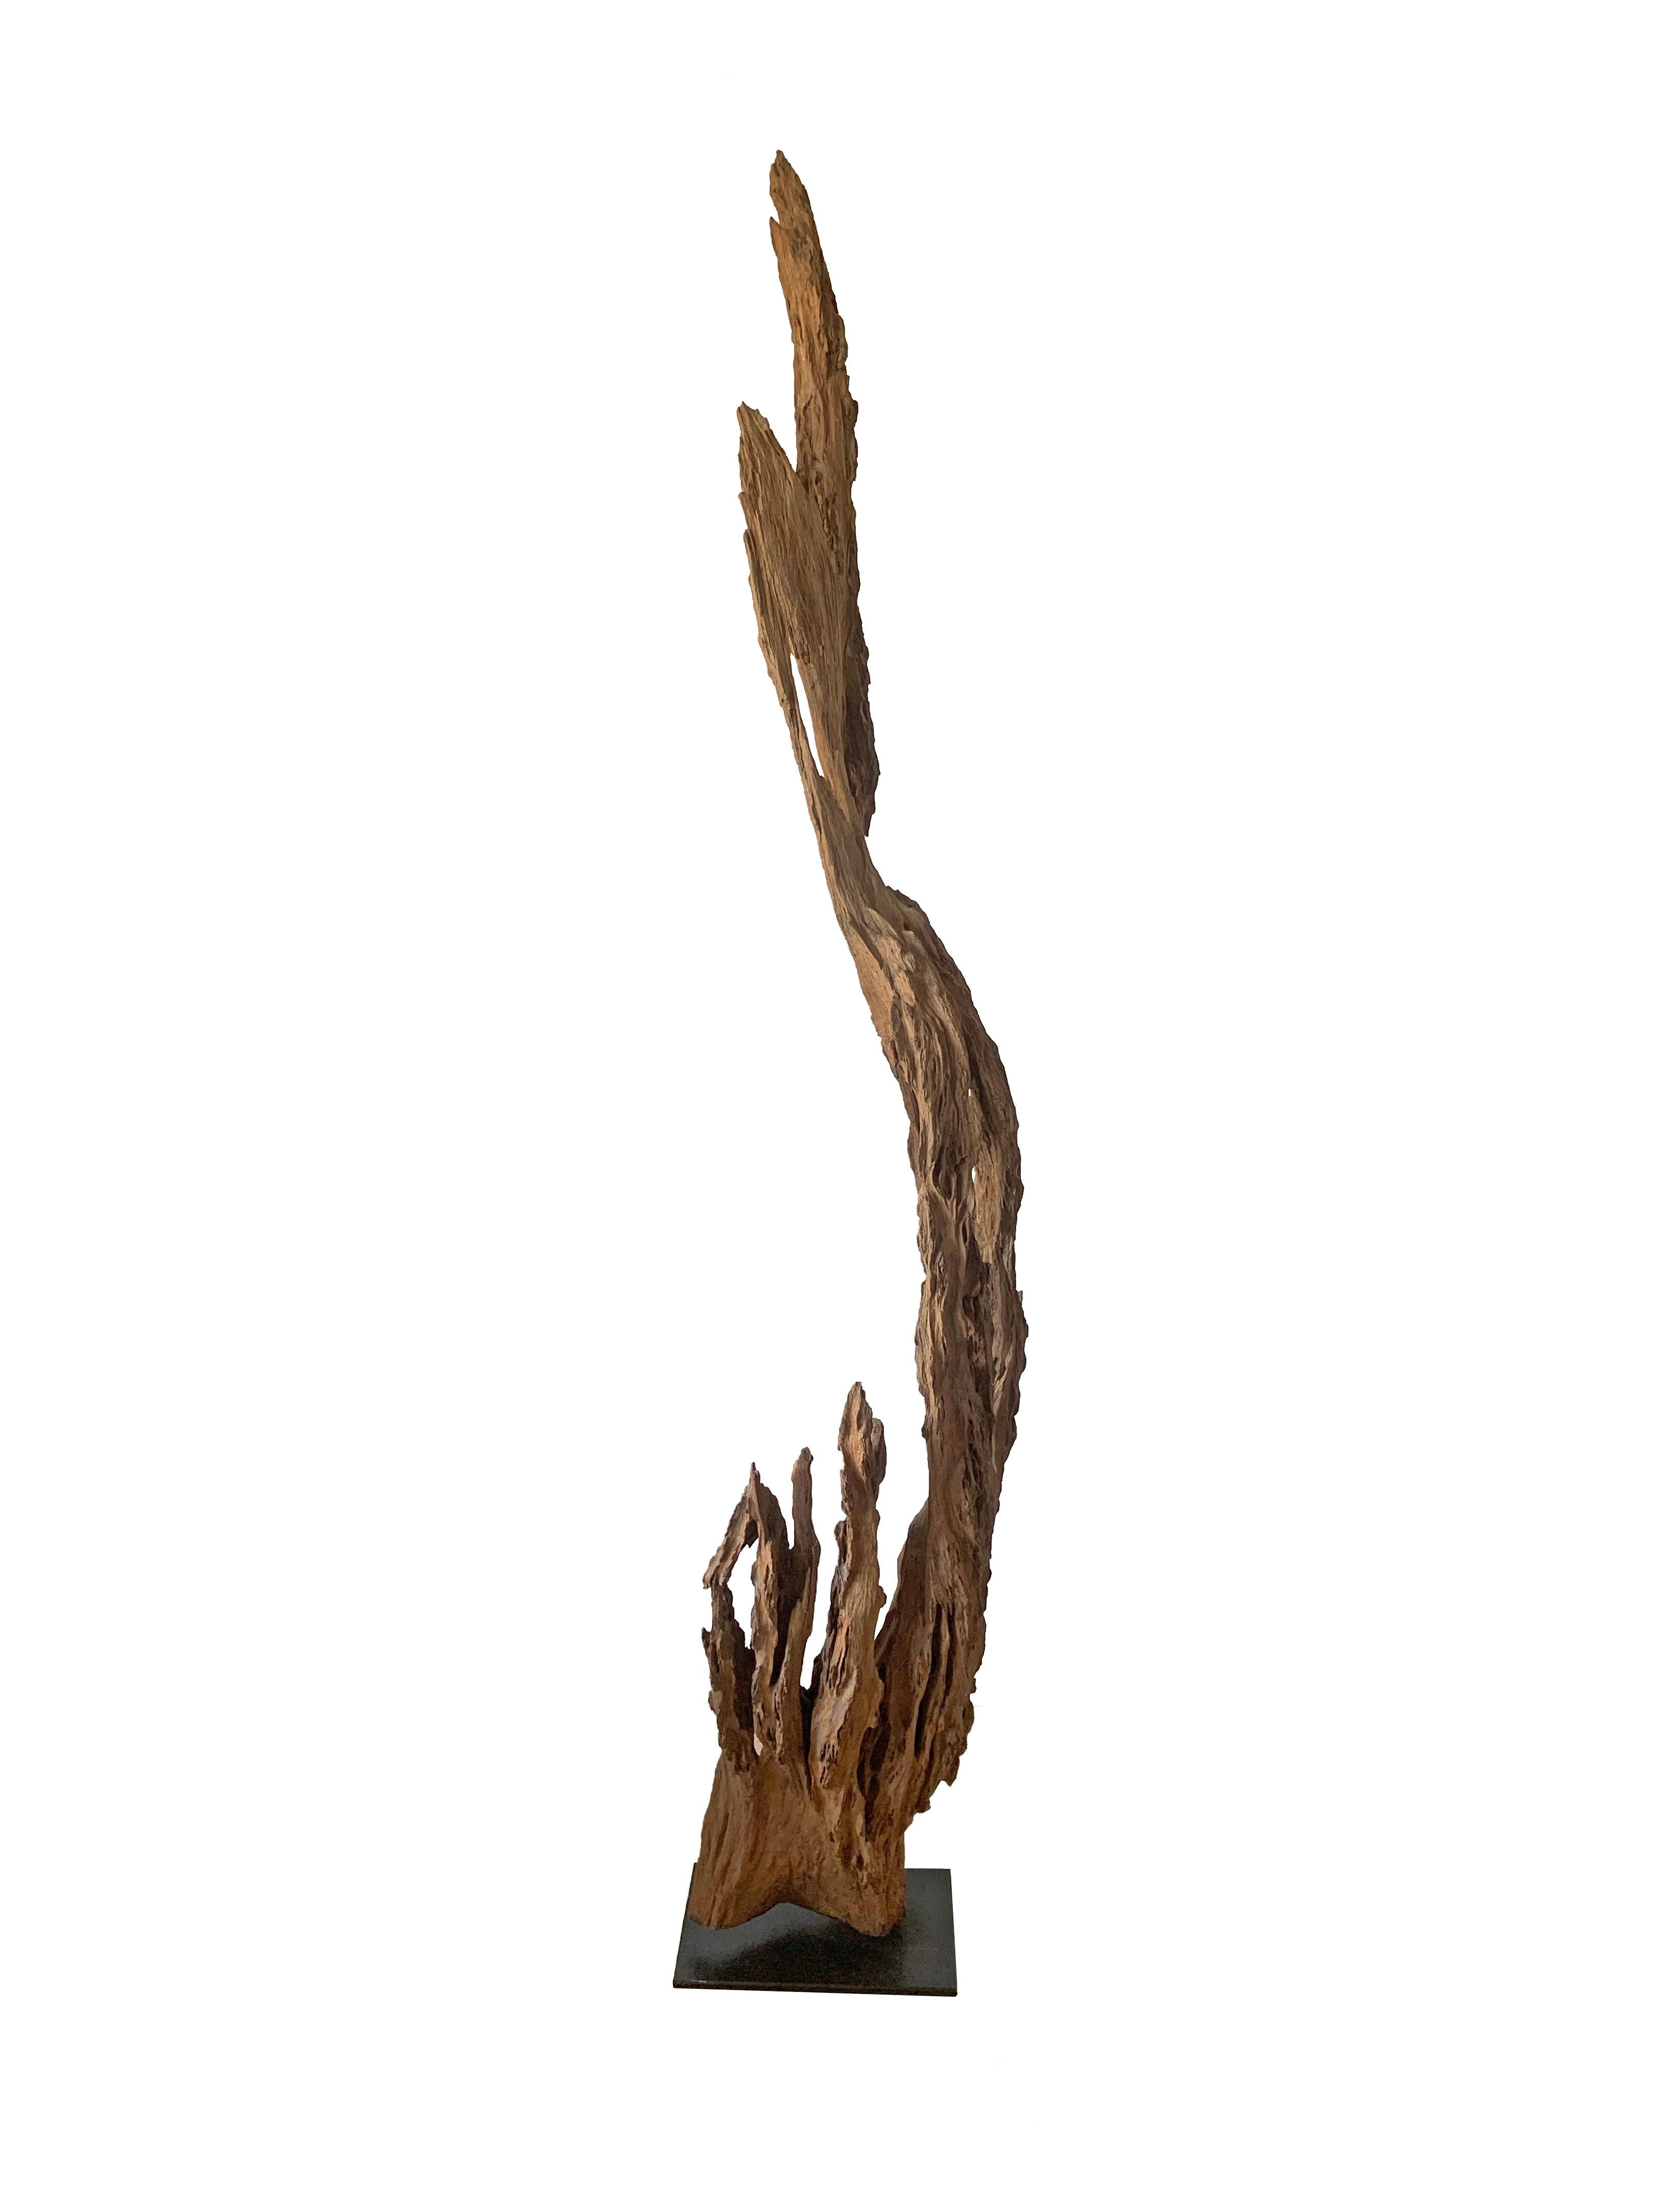 Eroded Teak Tree Skeleton Sculpture on Stand, Late 20th Century For Sale 2